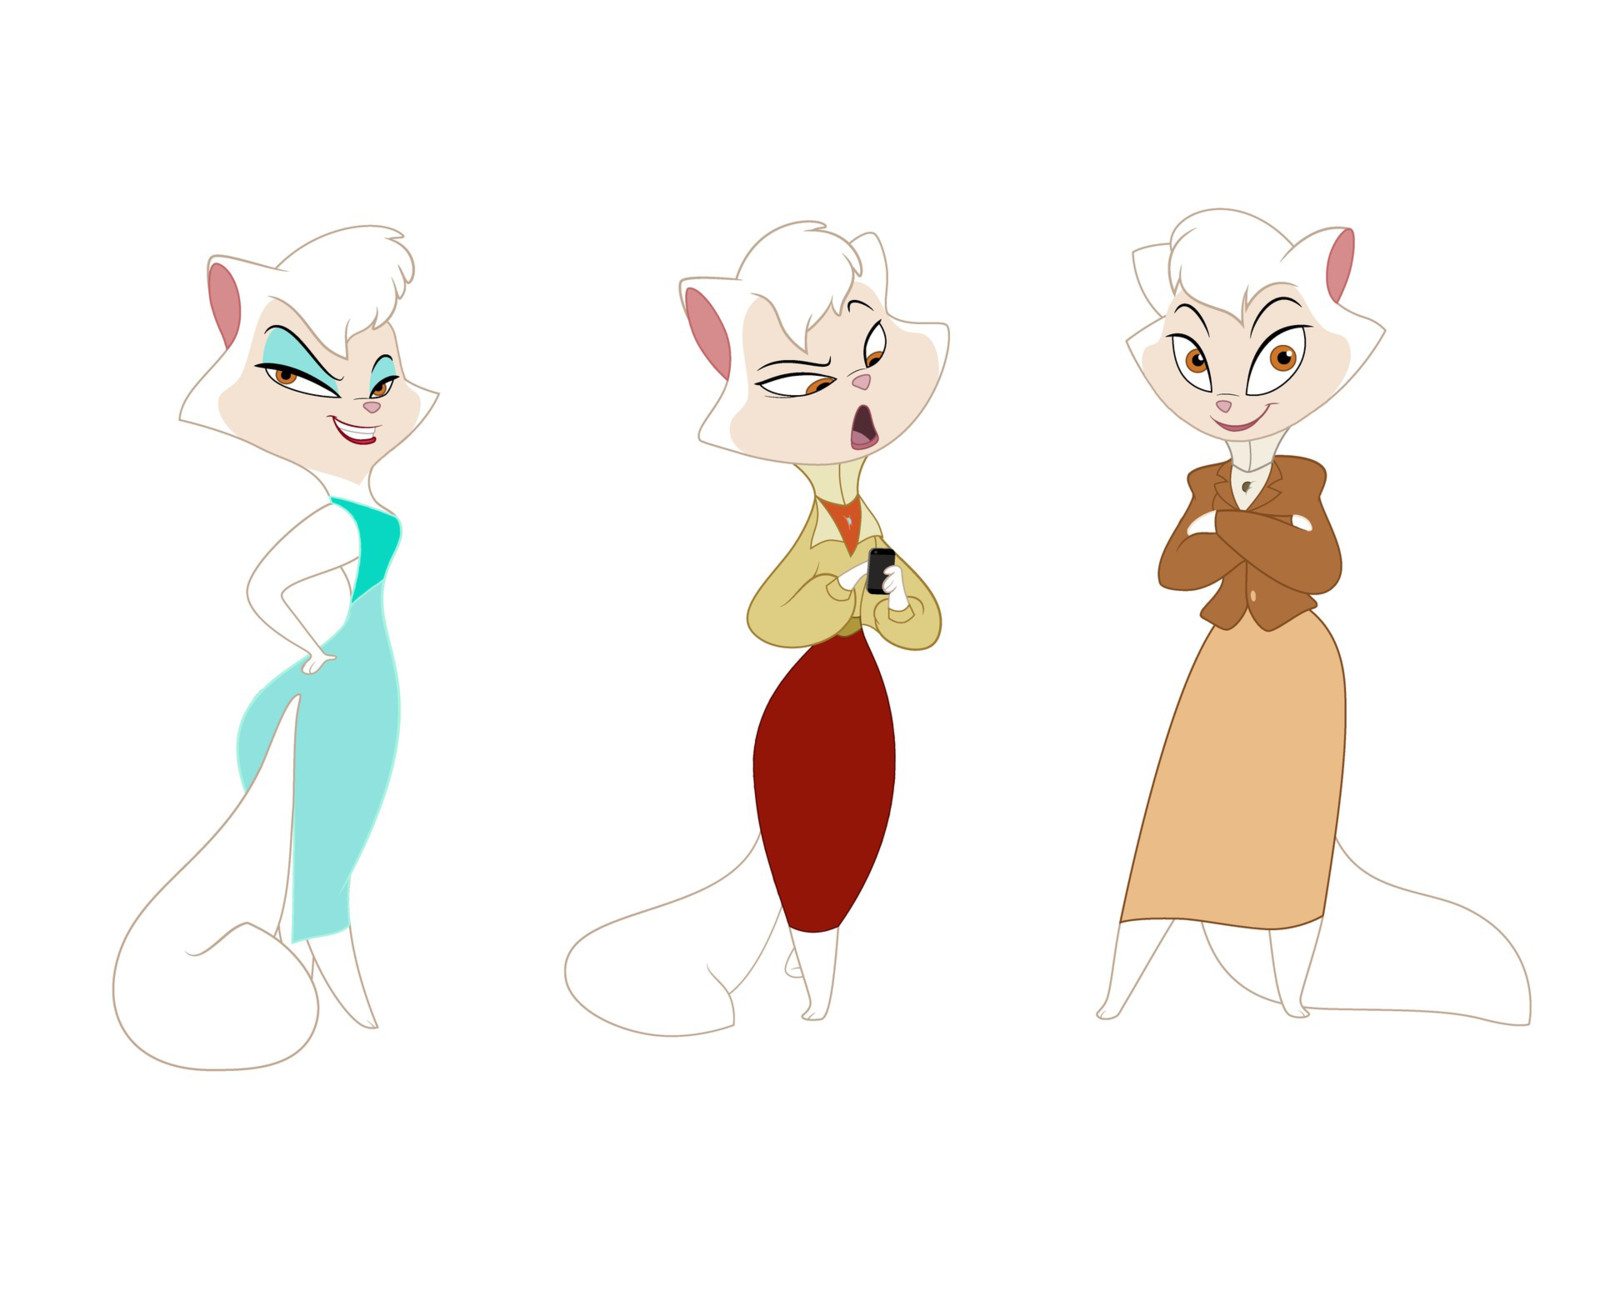 Some poses of Sawyer from Cats Donâ€™t Dance. 